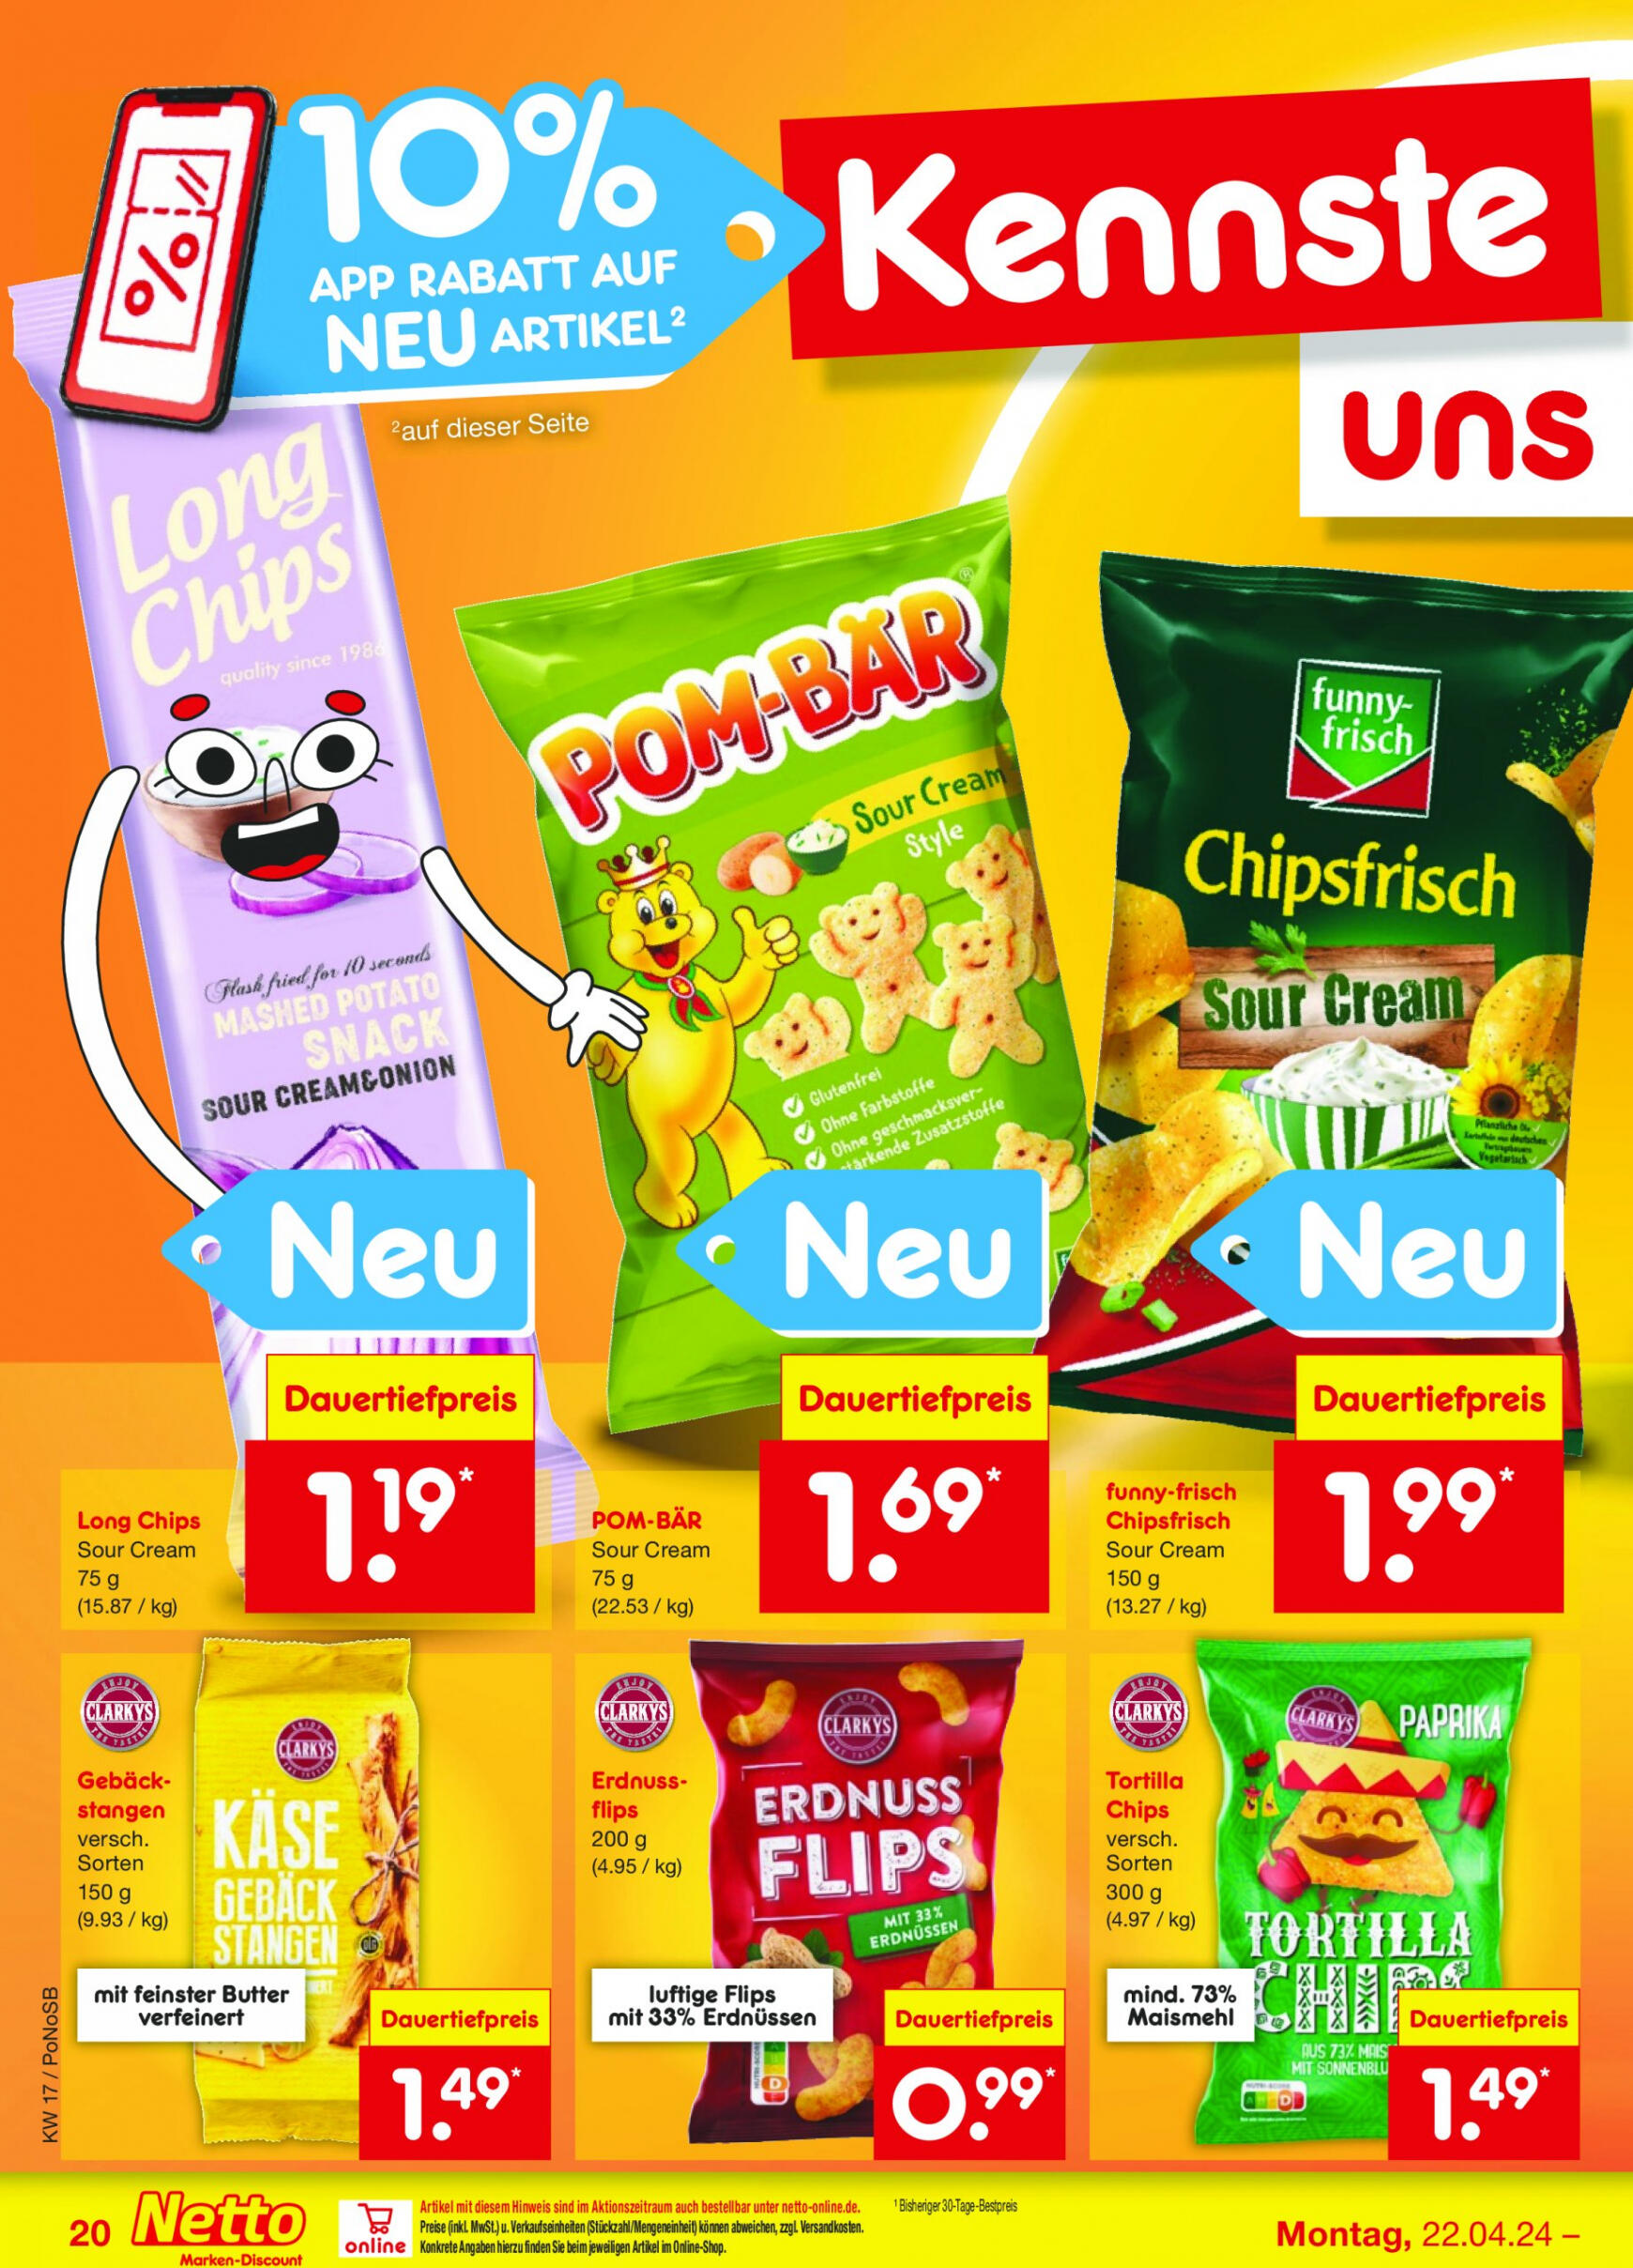 netto - Flyer Netto aktuell 22.04. - 27.04. - page: 22